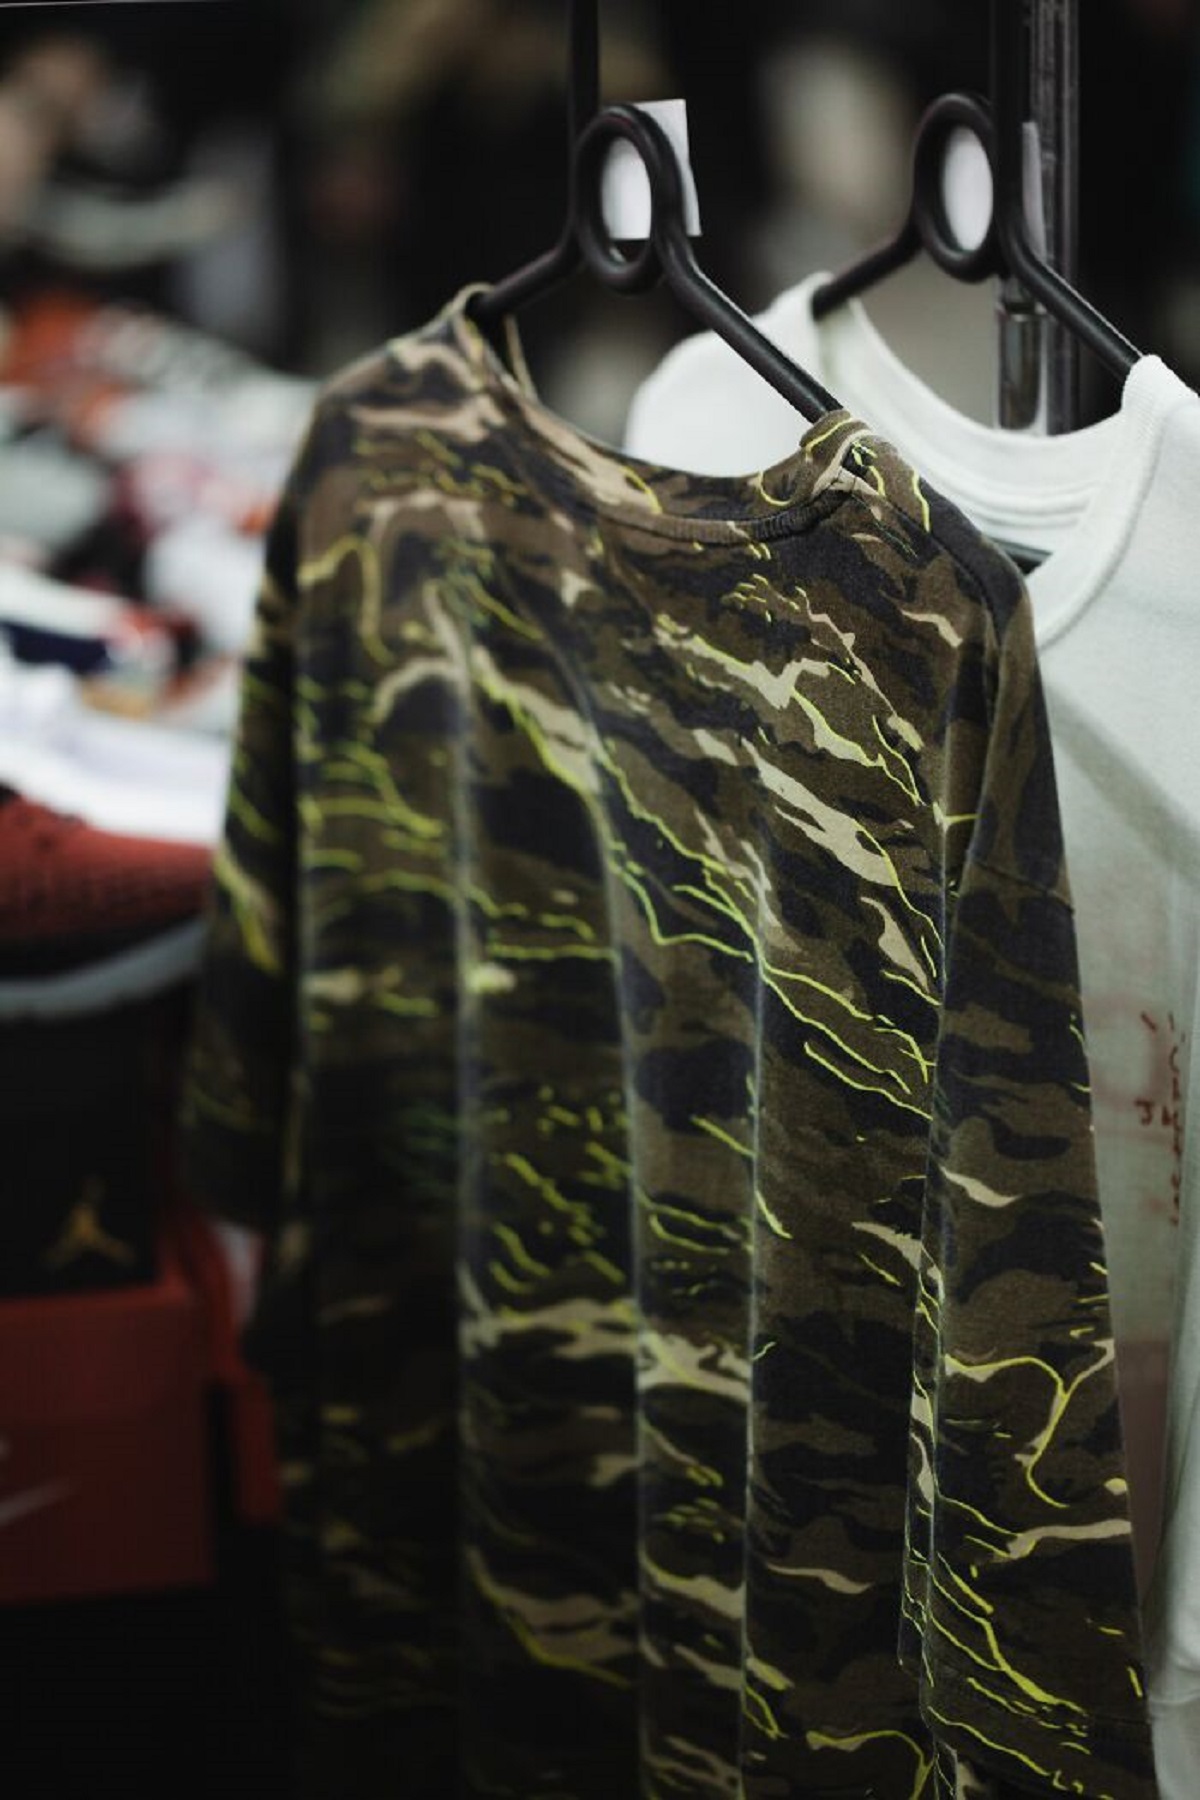 That camouflage clothing is illegal for civilians in several countries.